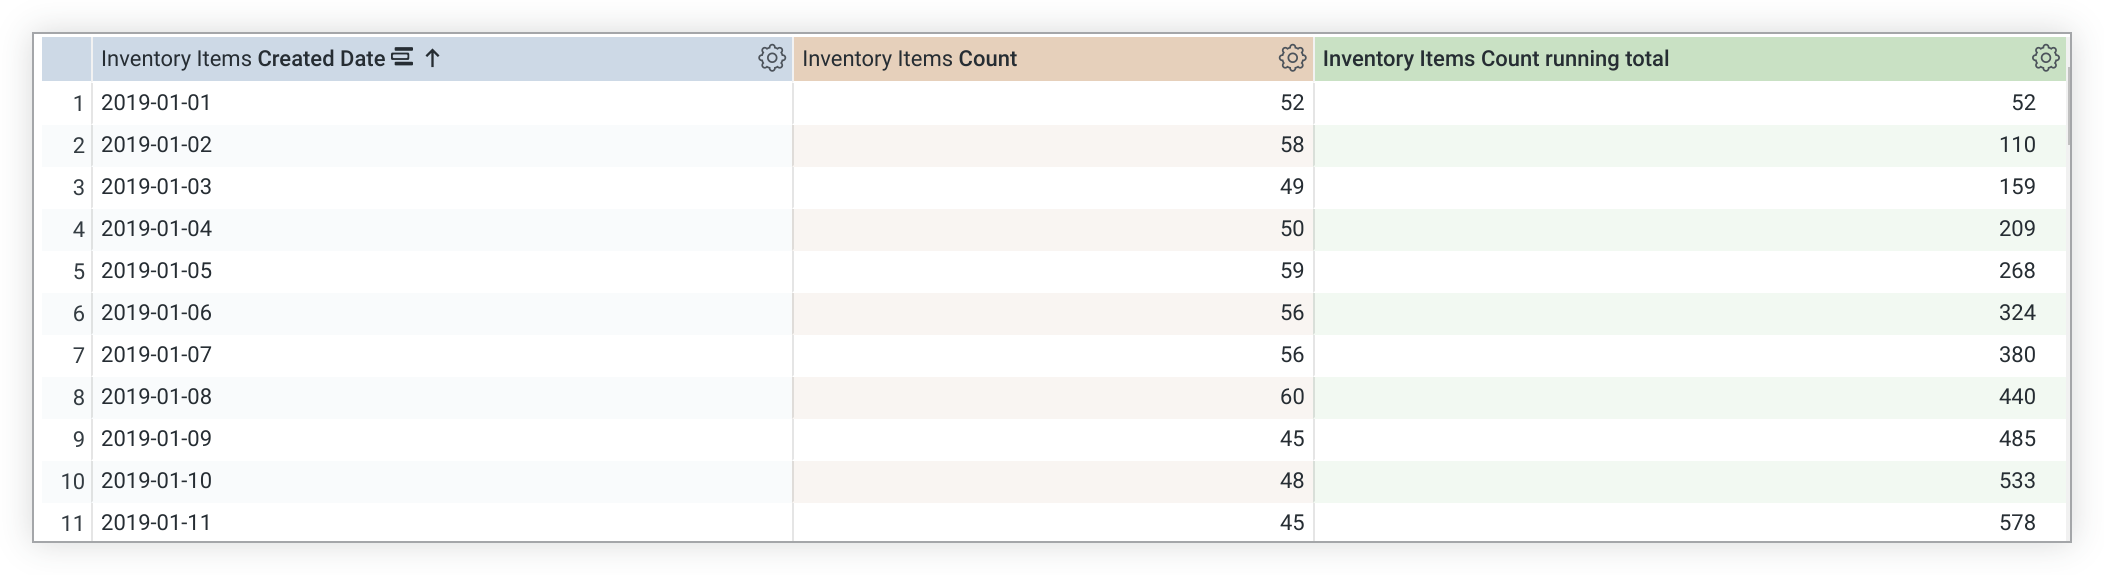 Explore data table showing a new column for the Inventory Items Count running total table calculation.